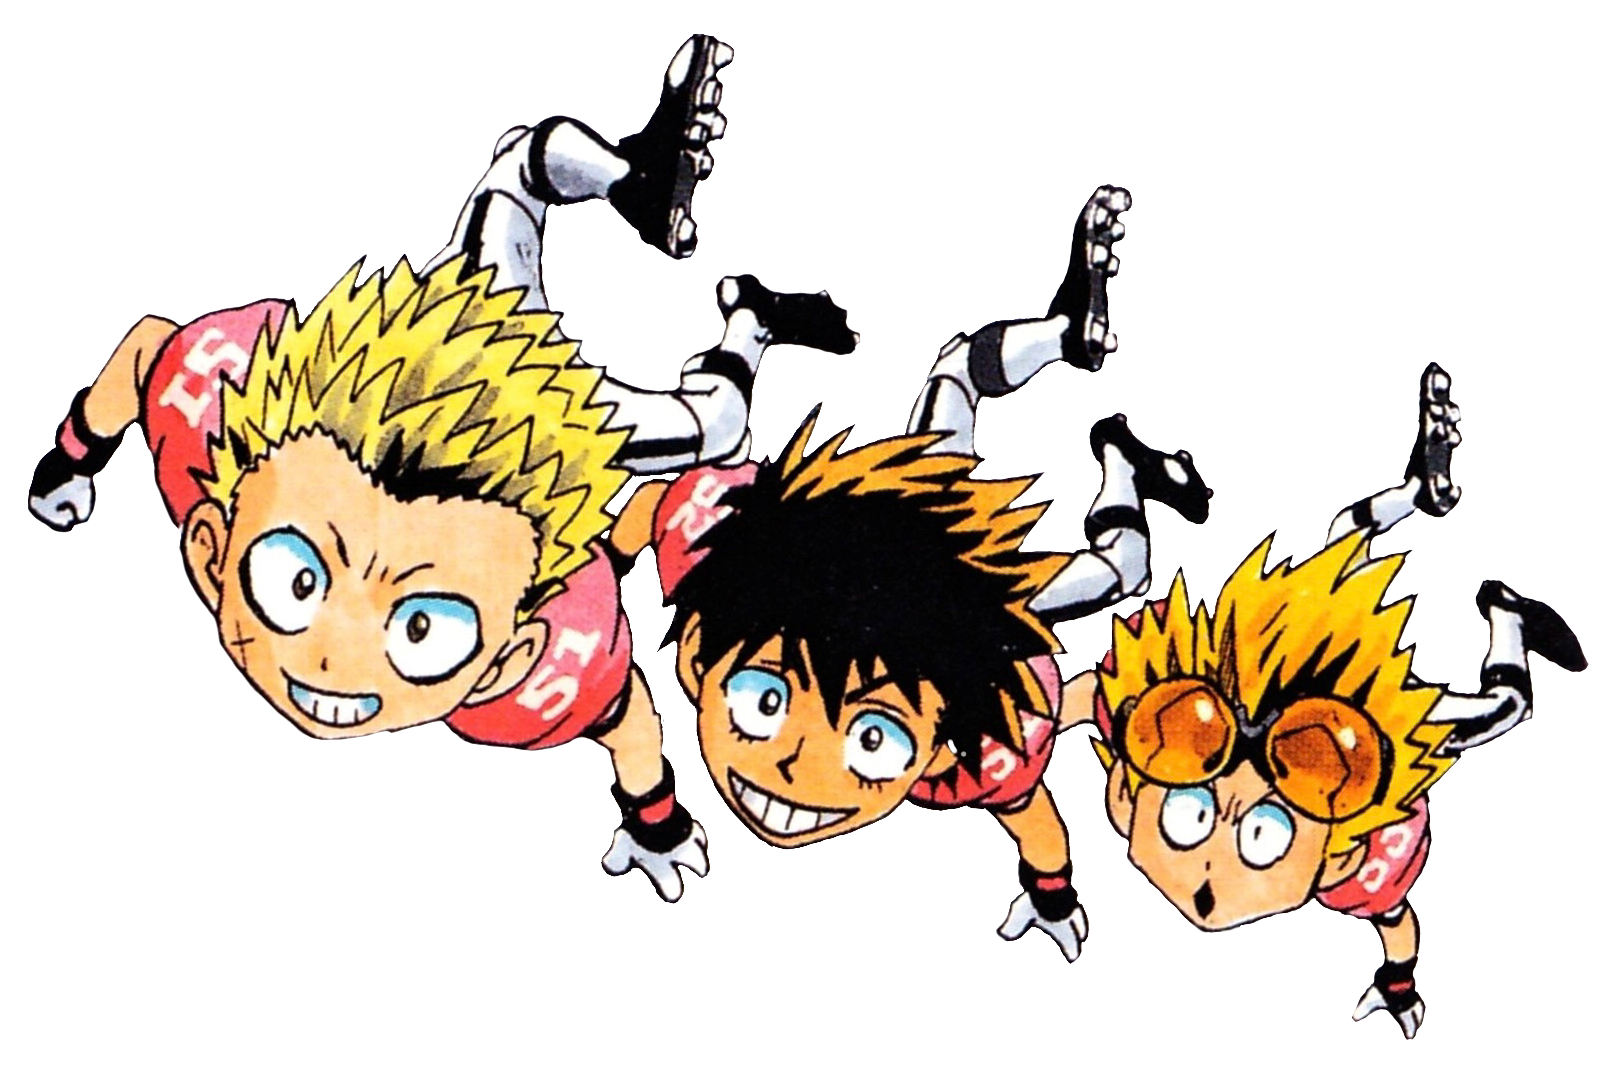 A transparent color illustration of the 'Hah Brothers' from left to right: Juumonji, Kuroki and Togano. Juumonji and Kuroki are smiling, and Togano's gaping as his sunglasses slip up over his eyes.